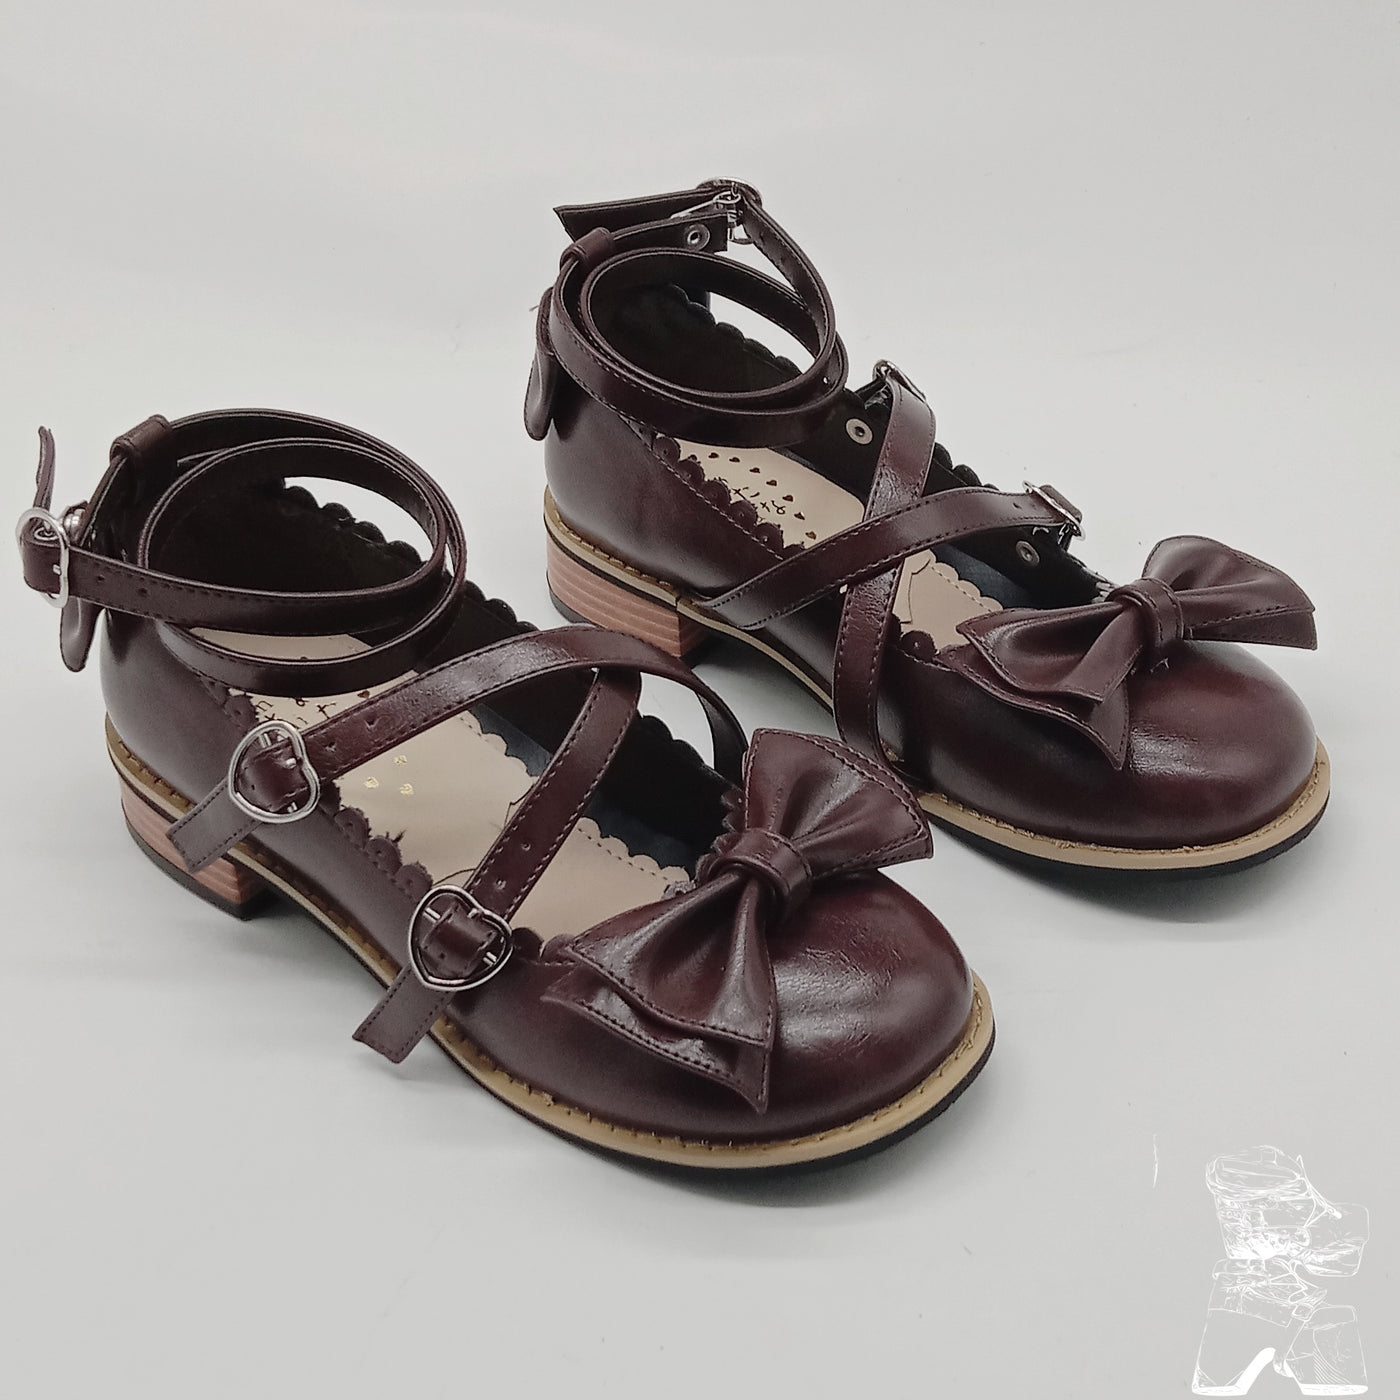 Antaina~ Japanese Style Lolita Tea Party Shoes Size 34-37 34 matte coffee 